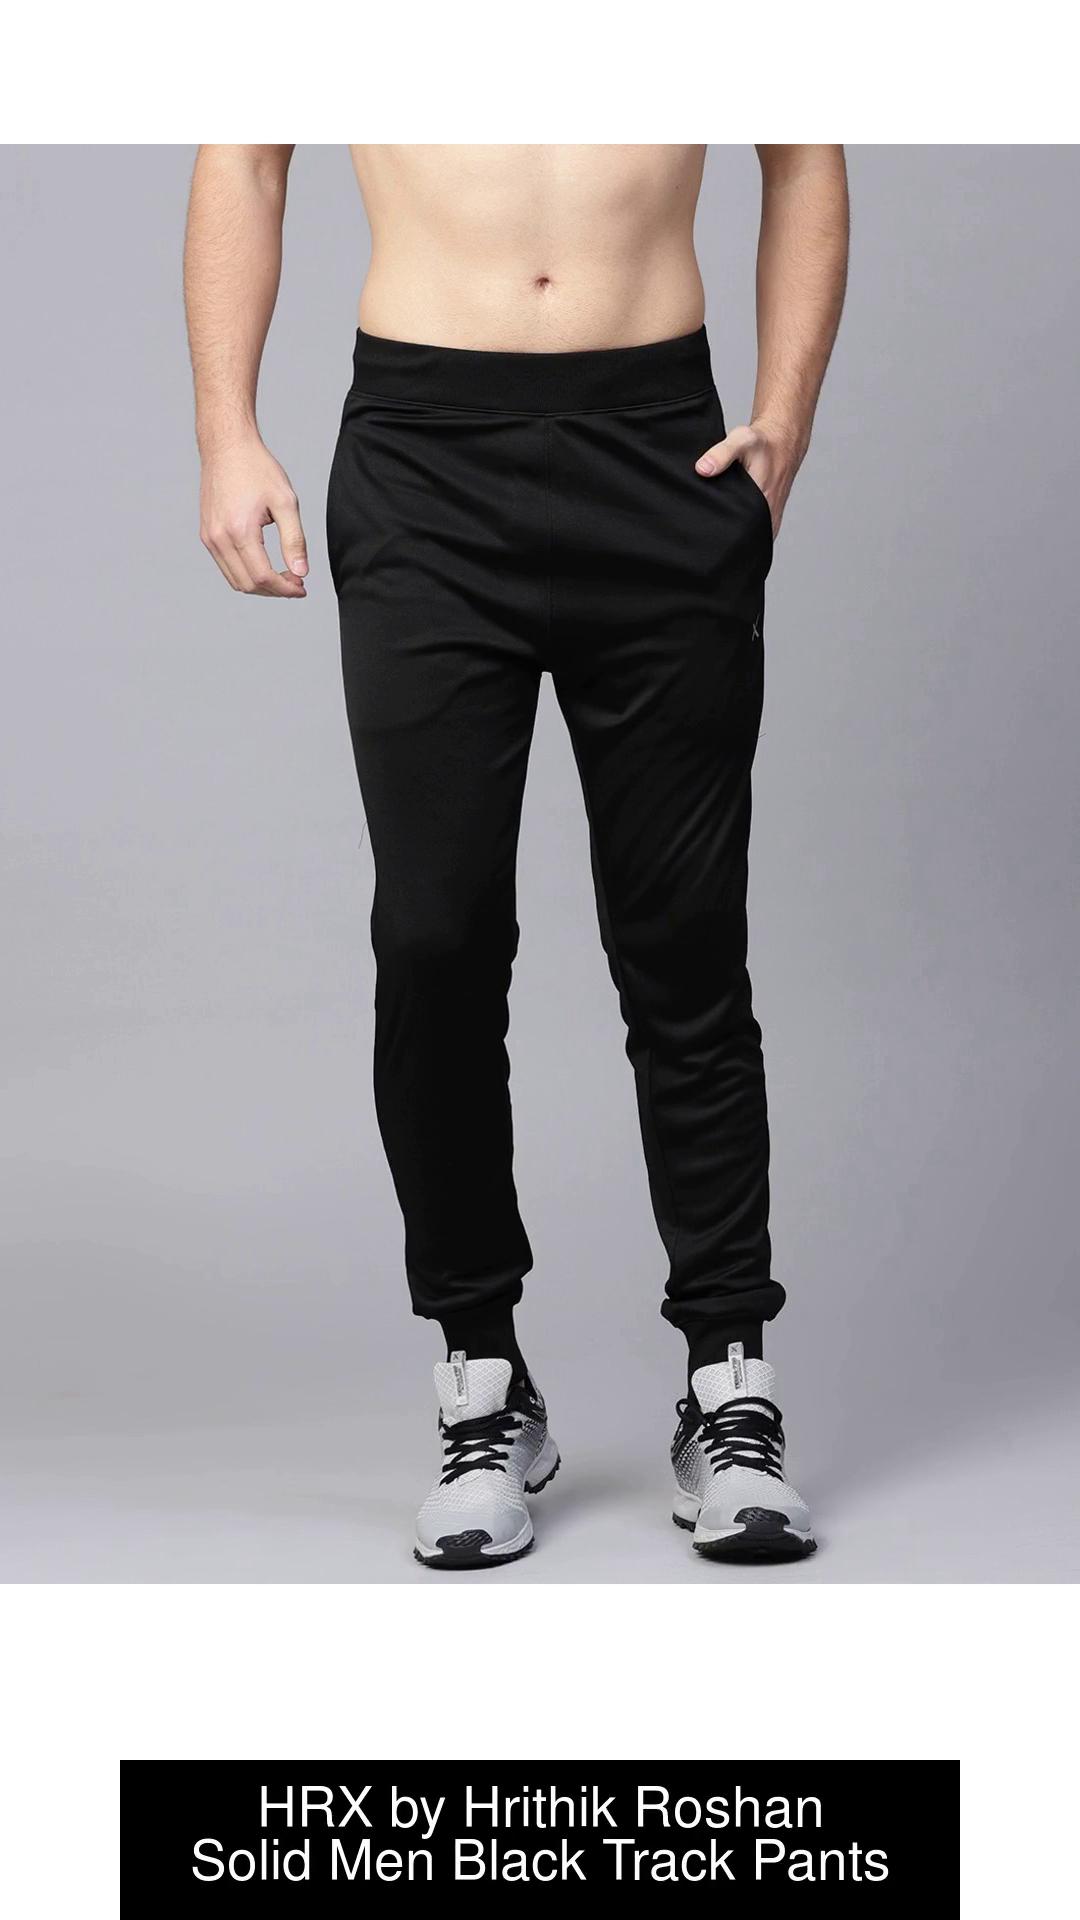 HRX by Hrithik Roshan Solid Men Black Track Pants - Buy HRX by Hrithik  Roshan Solid Men Black Track Pants Online at Best Prices in India